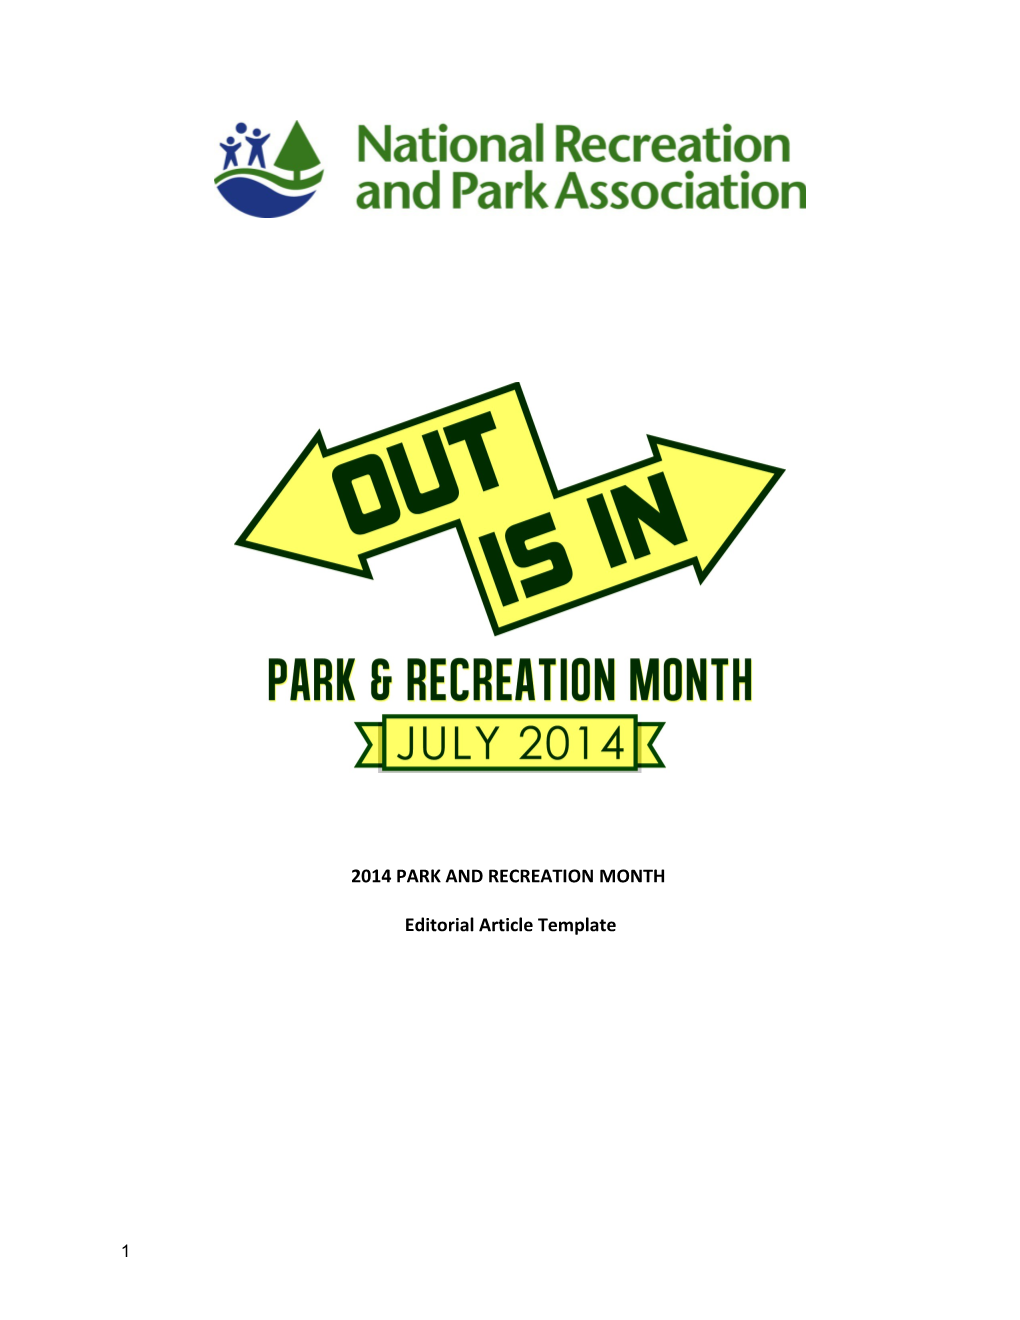 2014 Park and Recreation Month